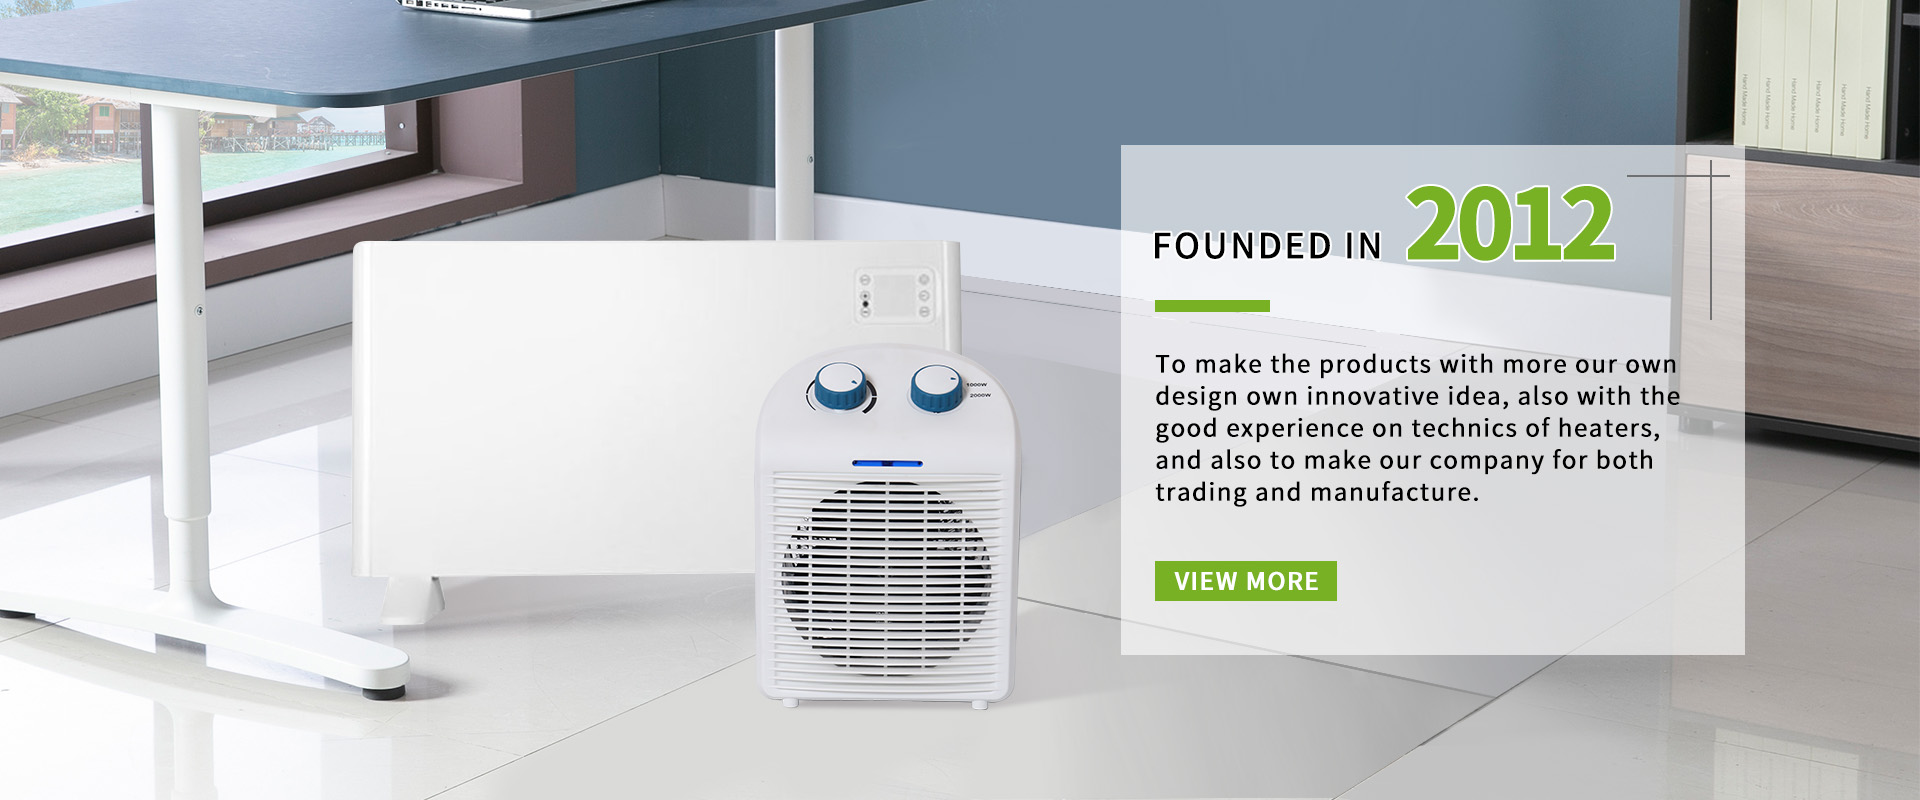 Convector Heater Manufacturers